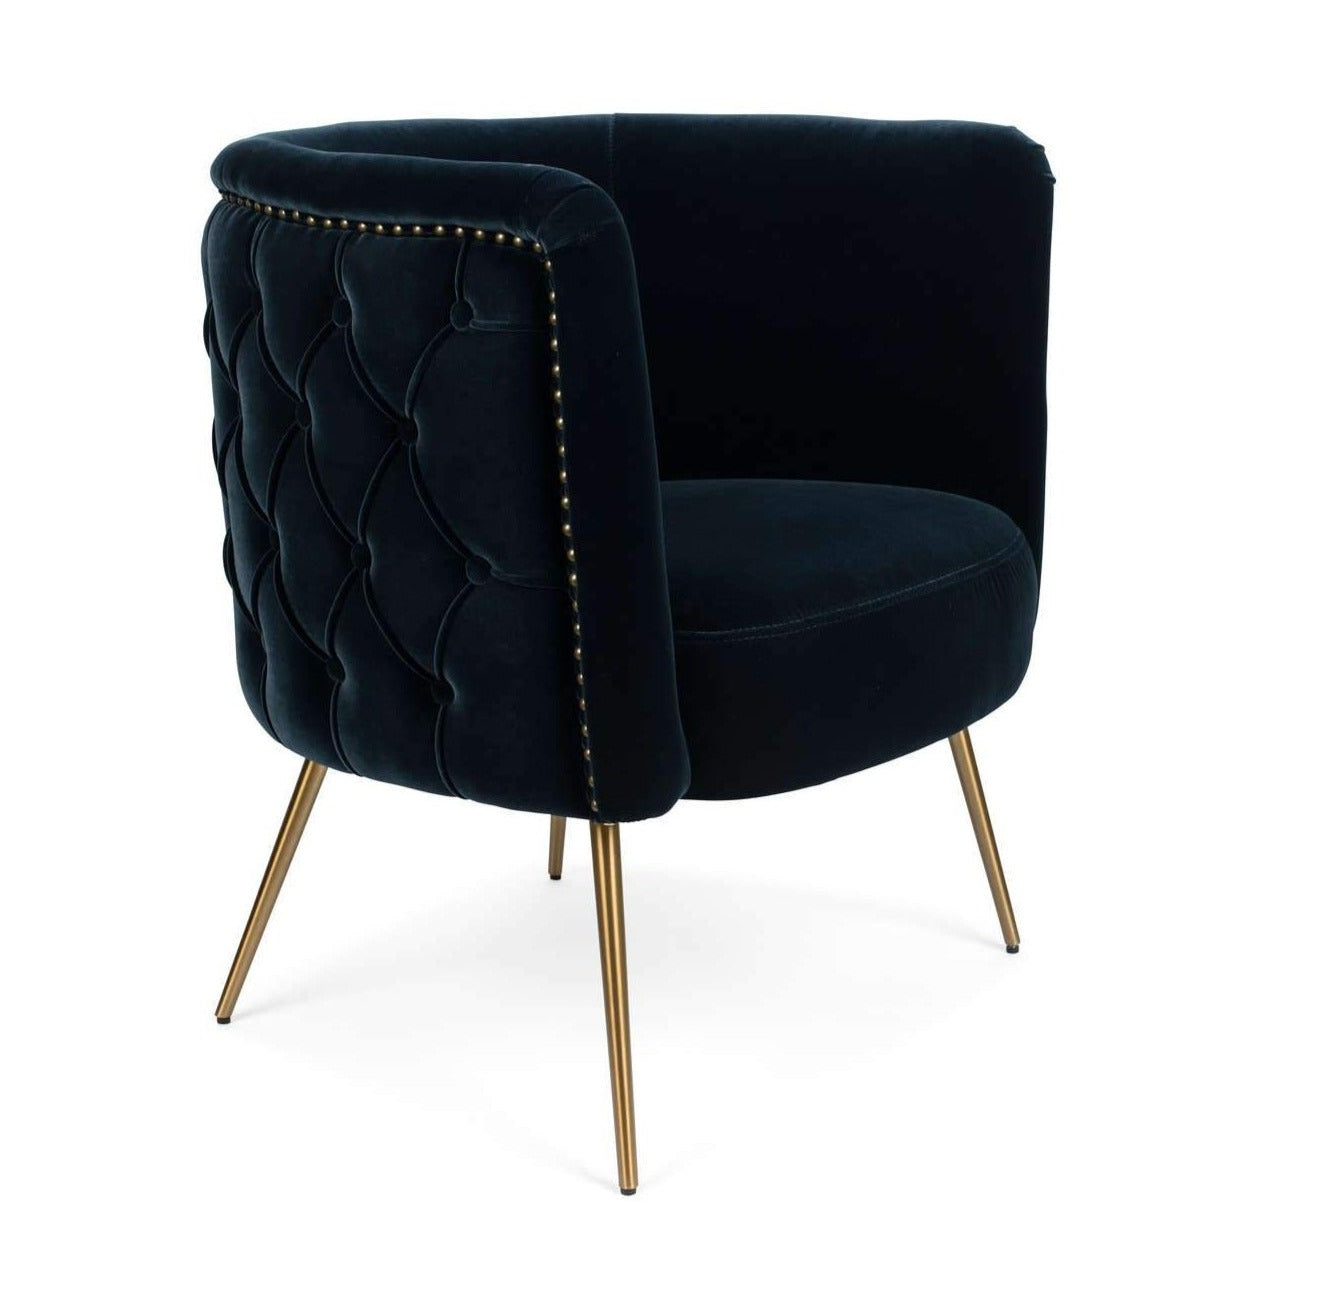 SUCH A STUD lounge chair navy blue, Bold Monkey, Eye on Design